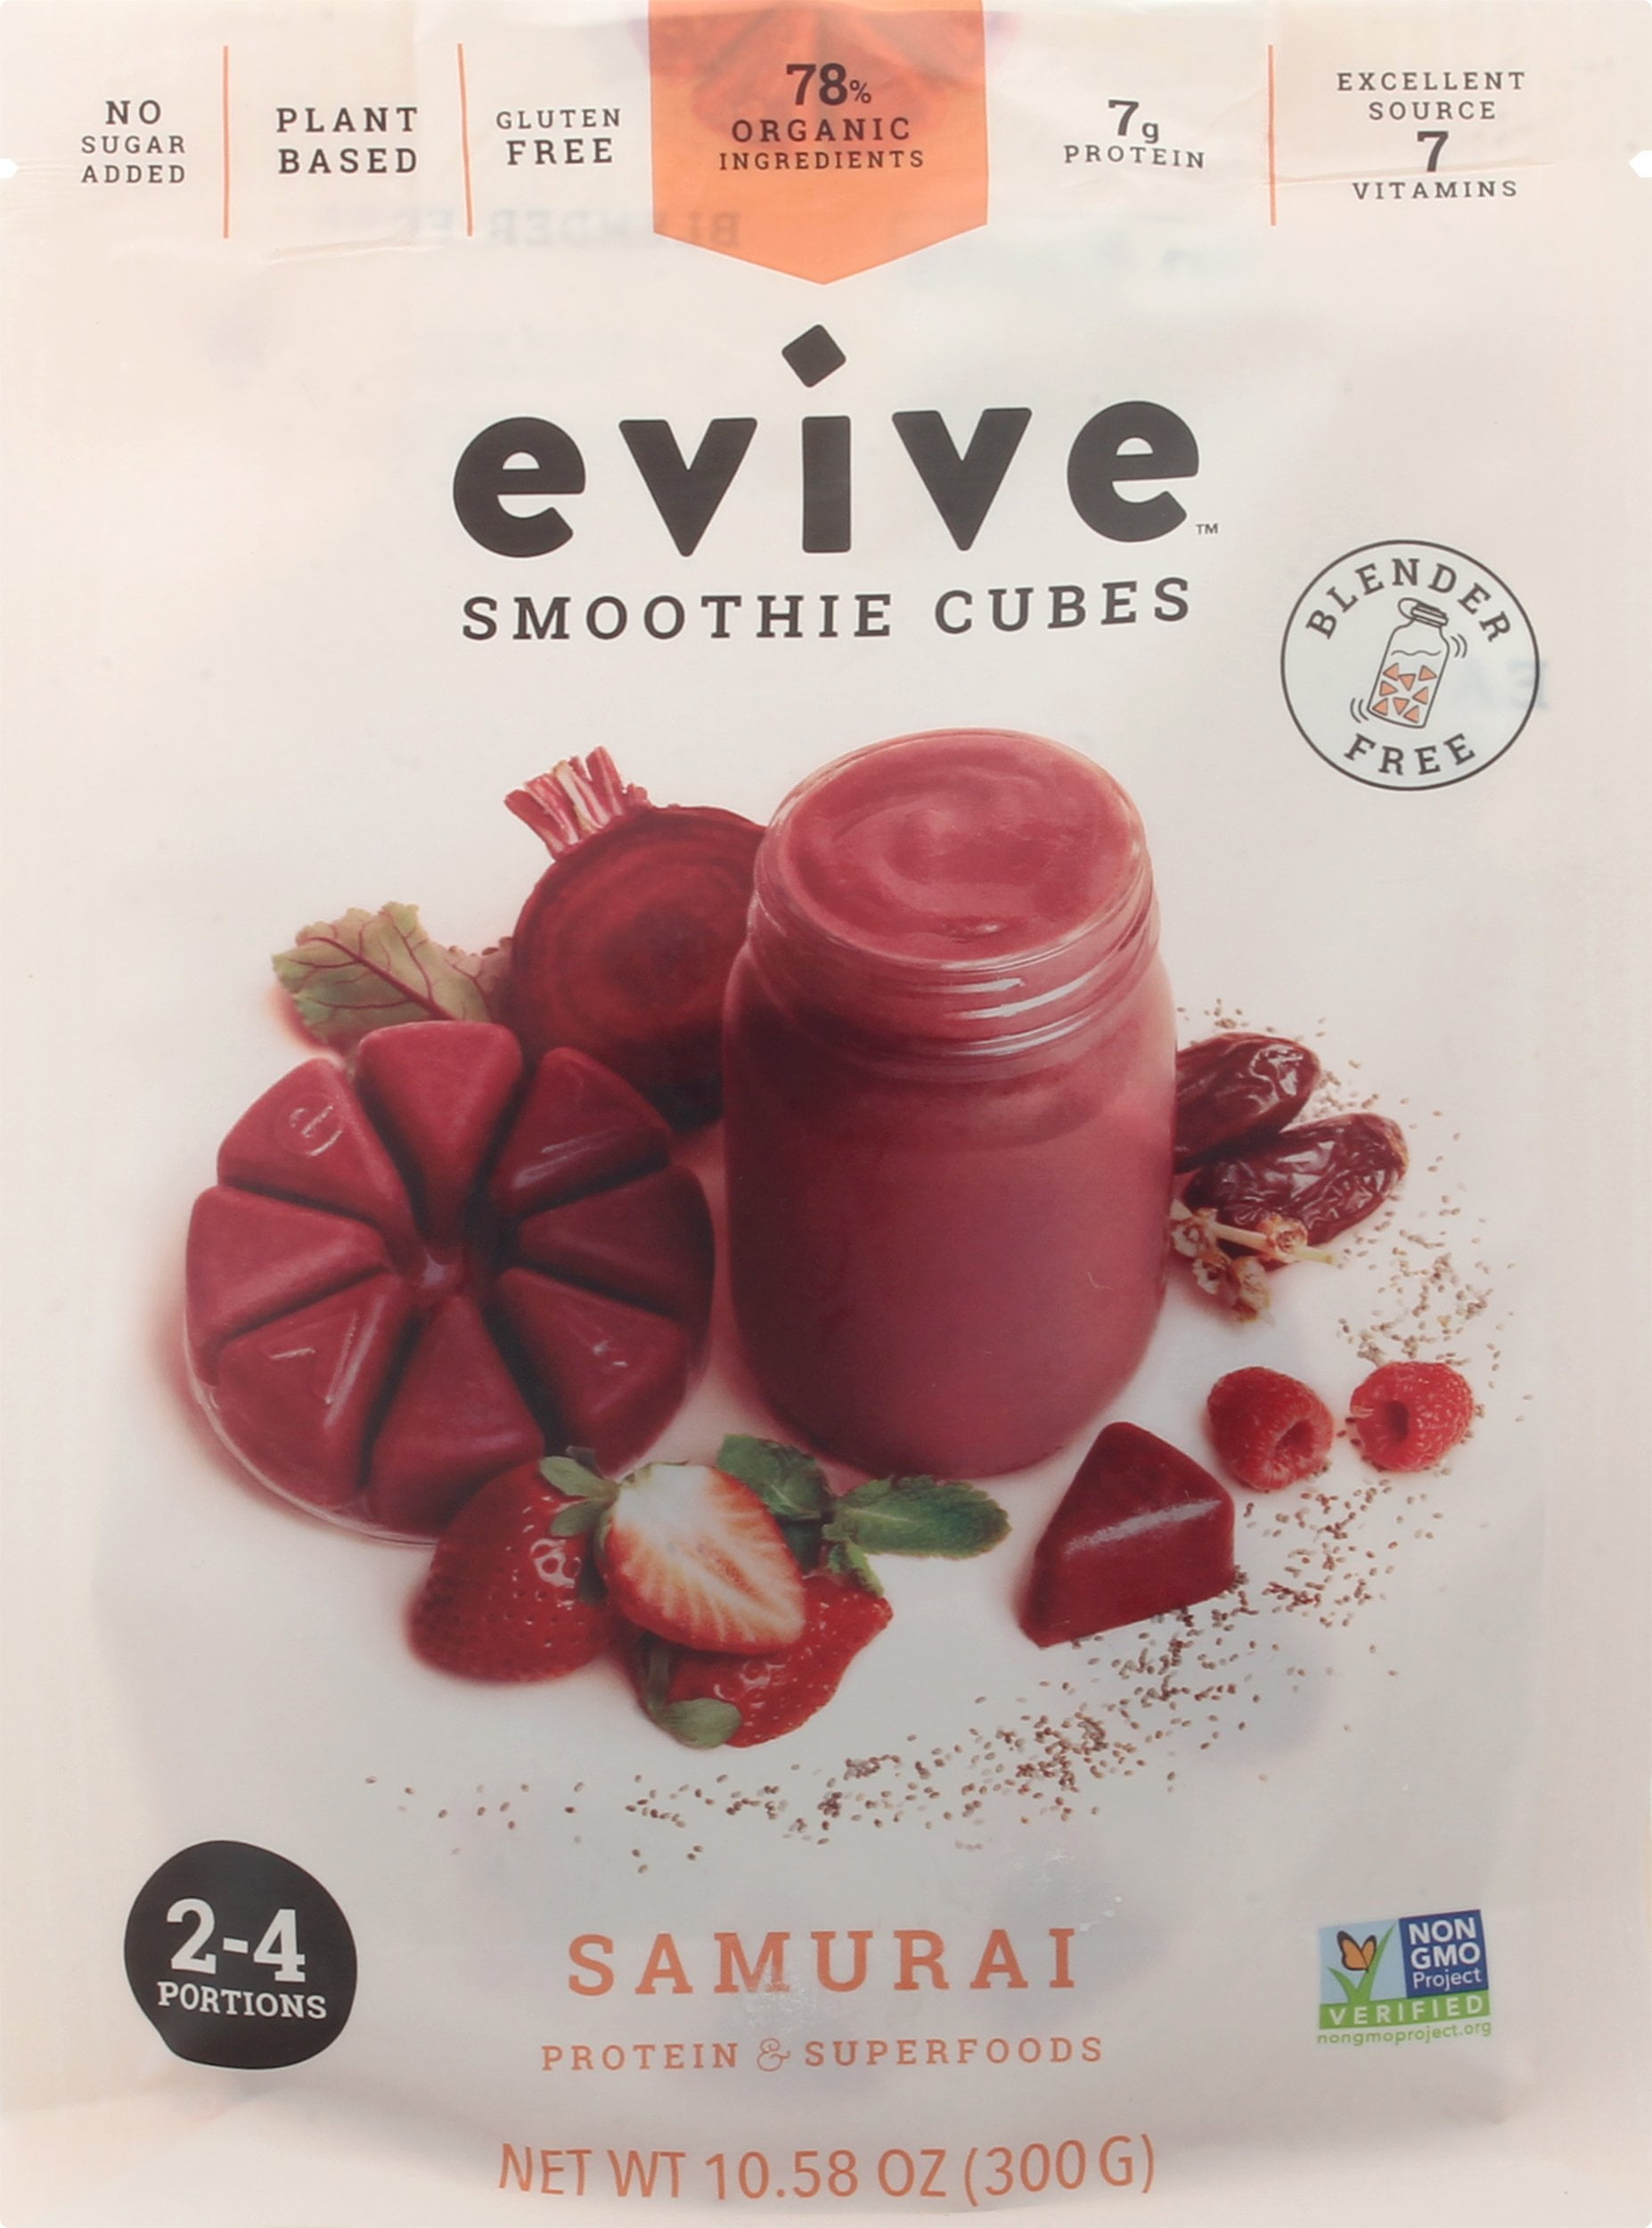 NEW! Evive Smoothie Cubes. Making smoothies quick and easy! No blender  needed, just pop the cubes and cover with liquid of choice, let melt, shake  and go😀 or blend for instant smoothie.